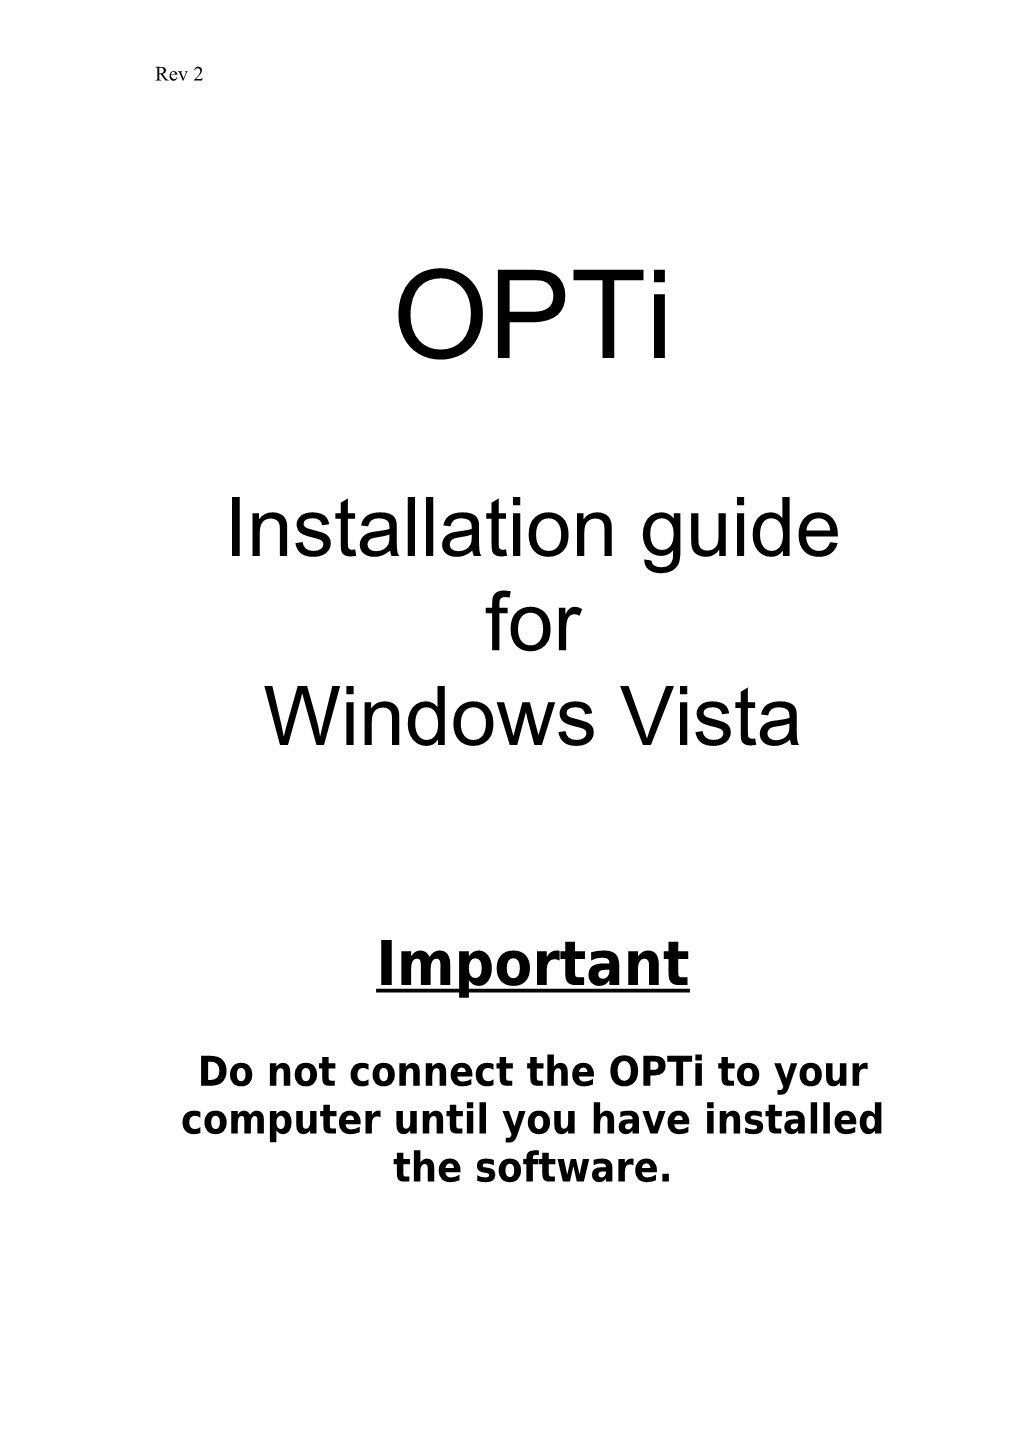 Do Not Connect the Opti to Your Computer Until You Have Installed the Software